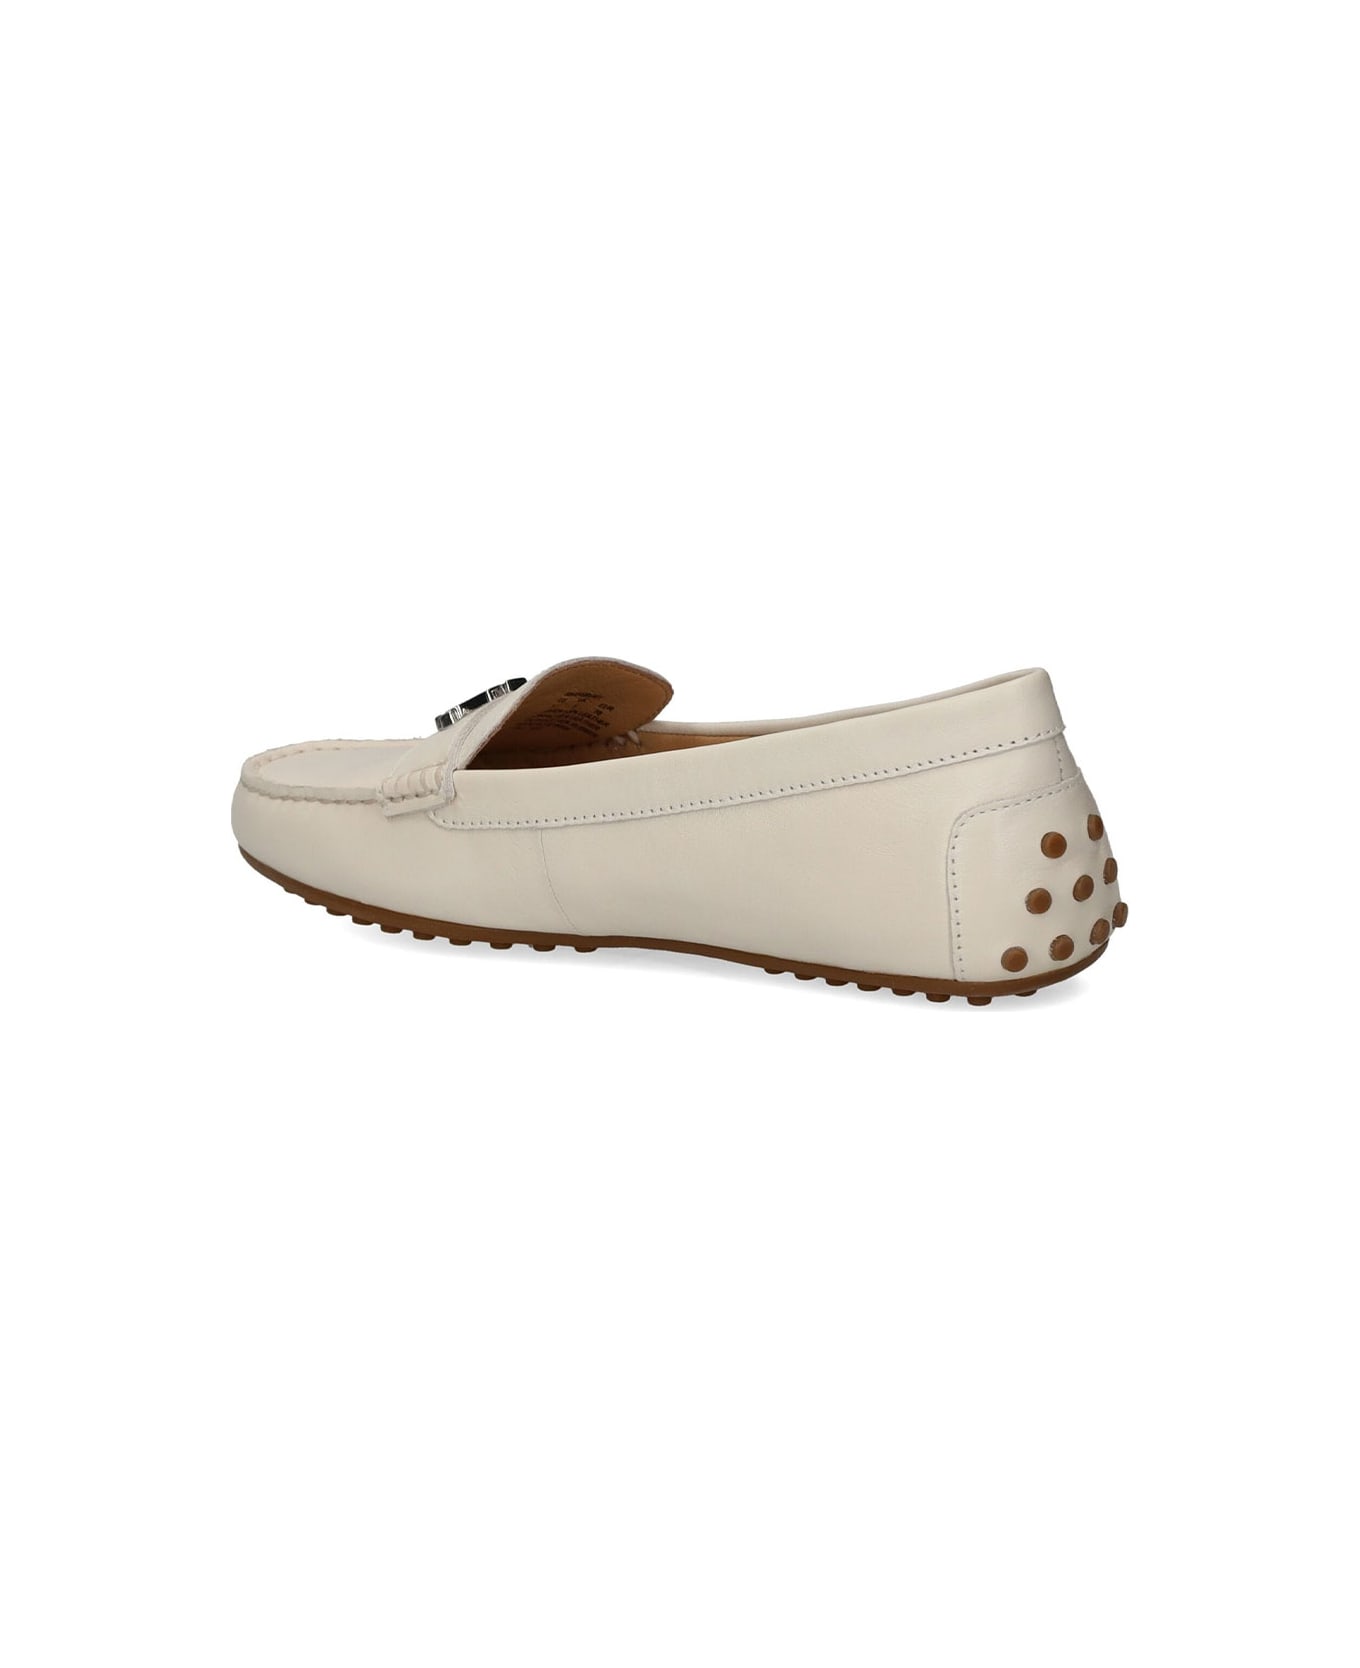 Ralph Lauren Moccasin In Soft White Leather - SOFT WHITE